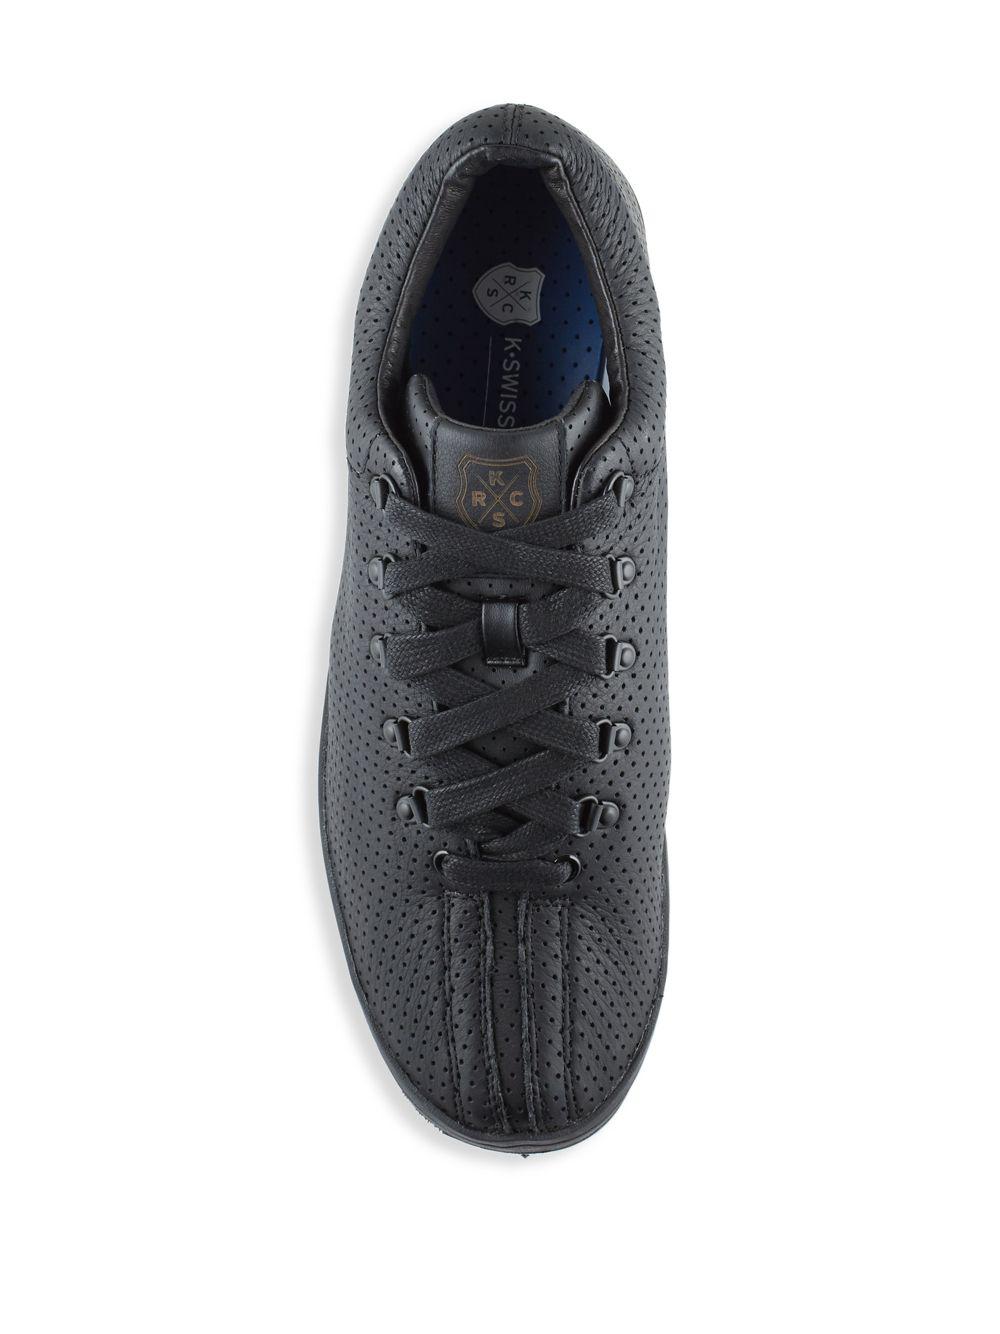 K-swiss Perforated Leather Sneakers in Black for Men | Lyst